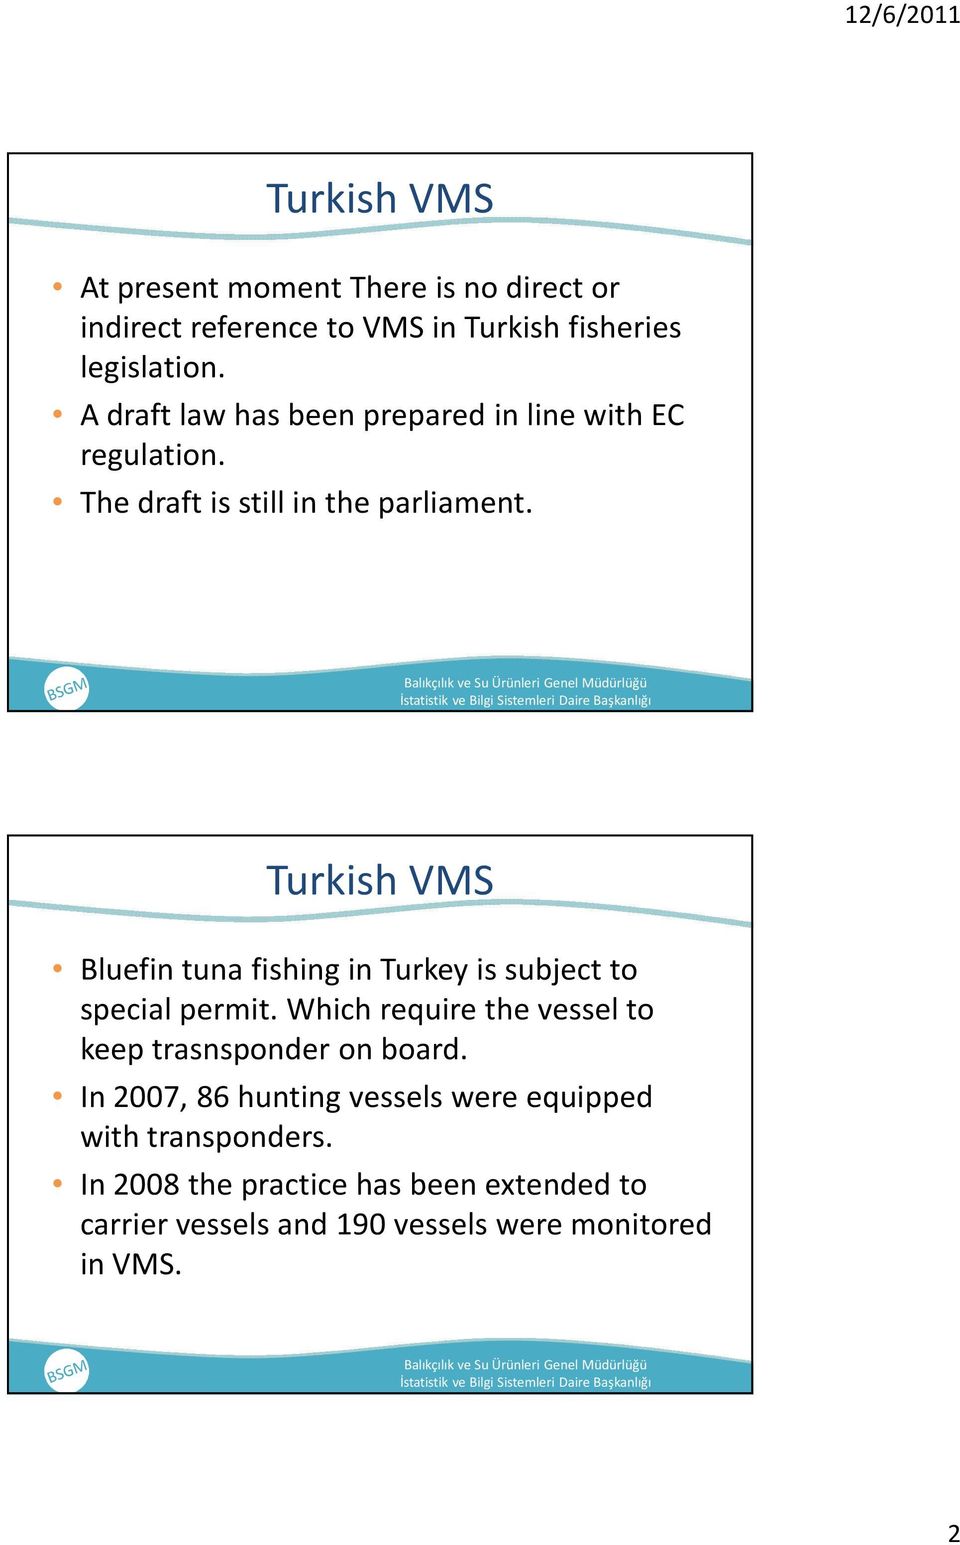 Bluefintuna fishingin Turkeyis subjectto special permit. Which require the vessel to keeptrasnsponderon board.